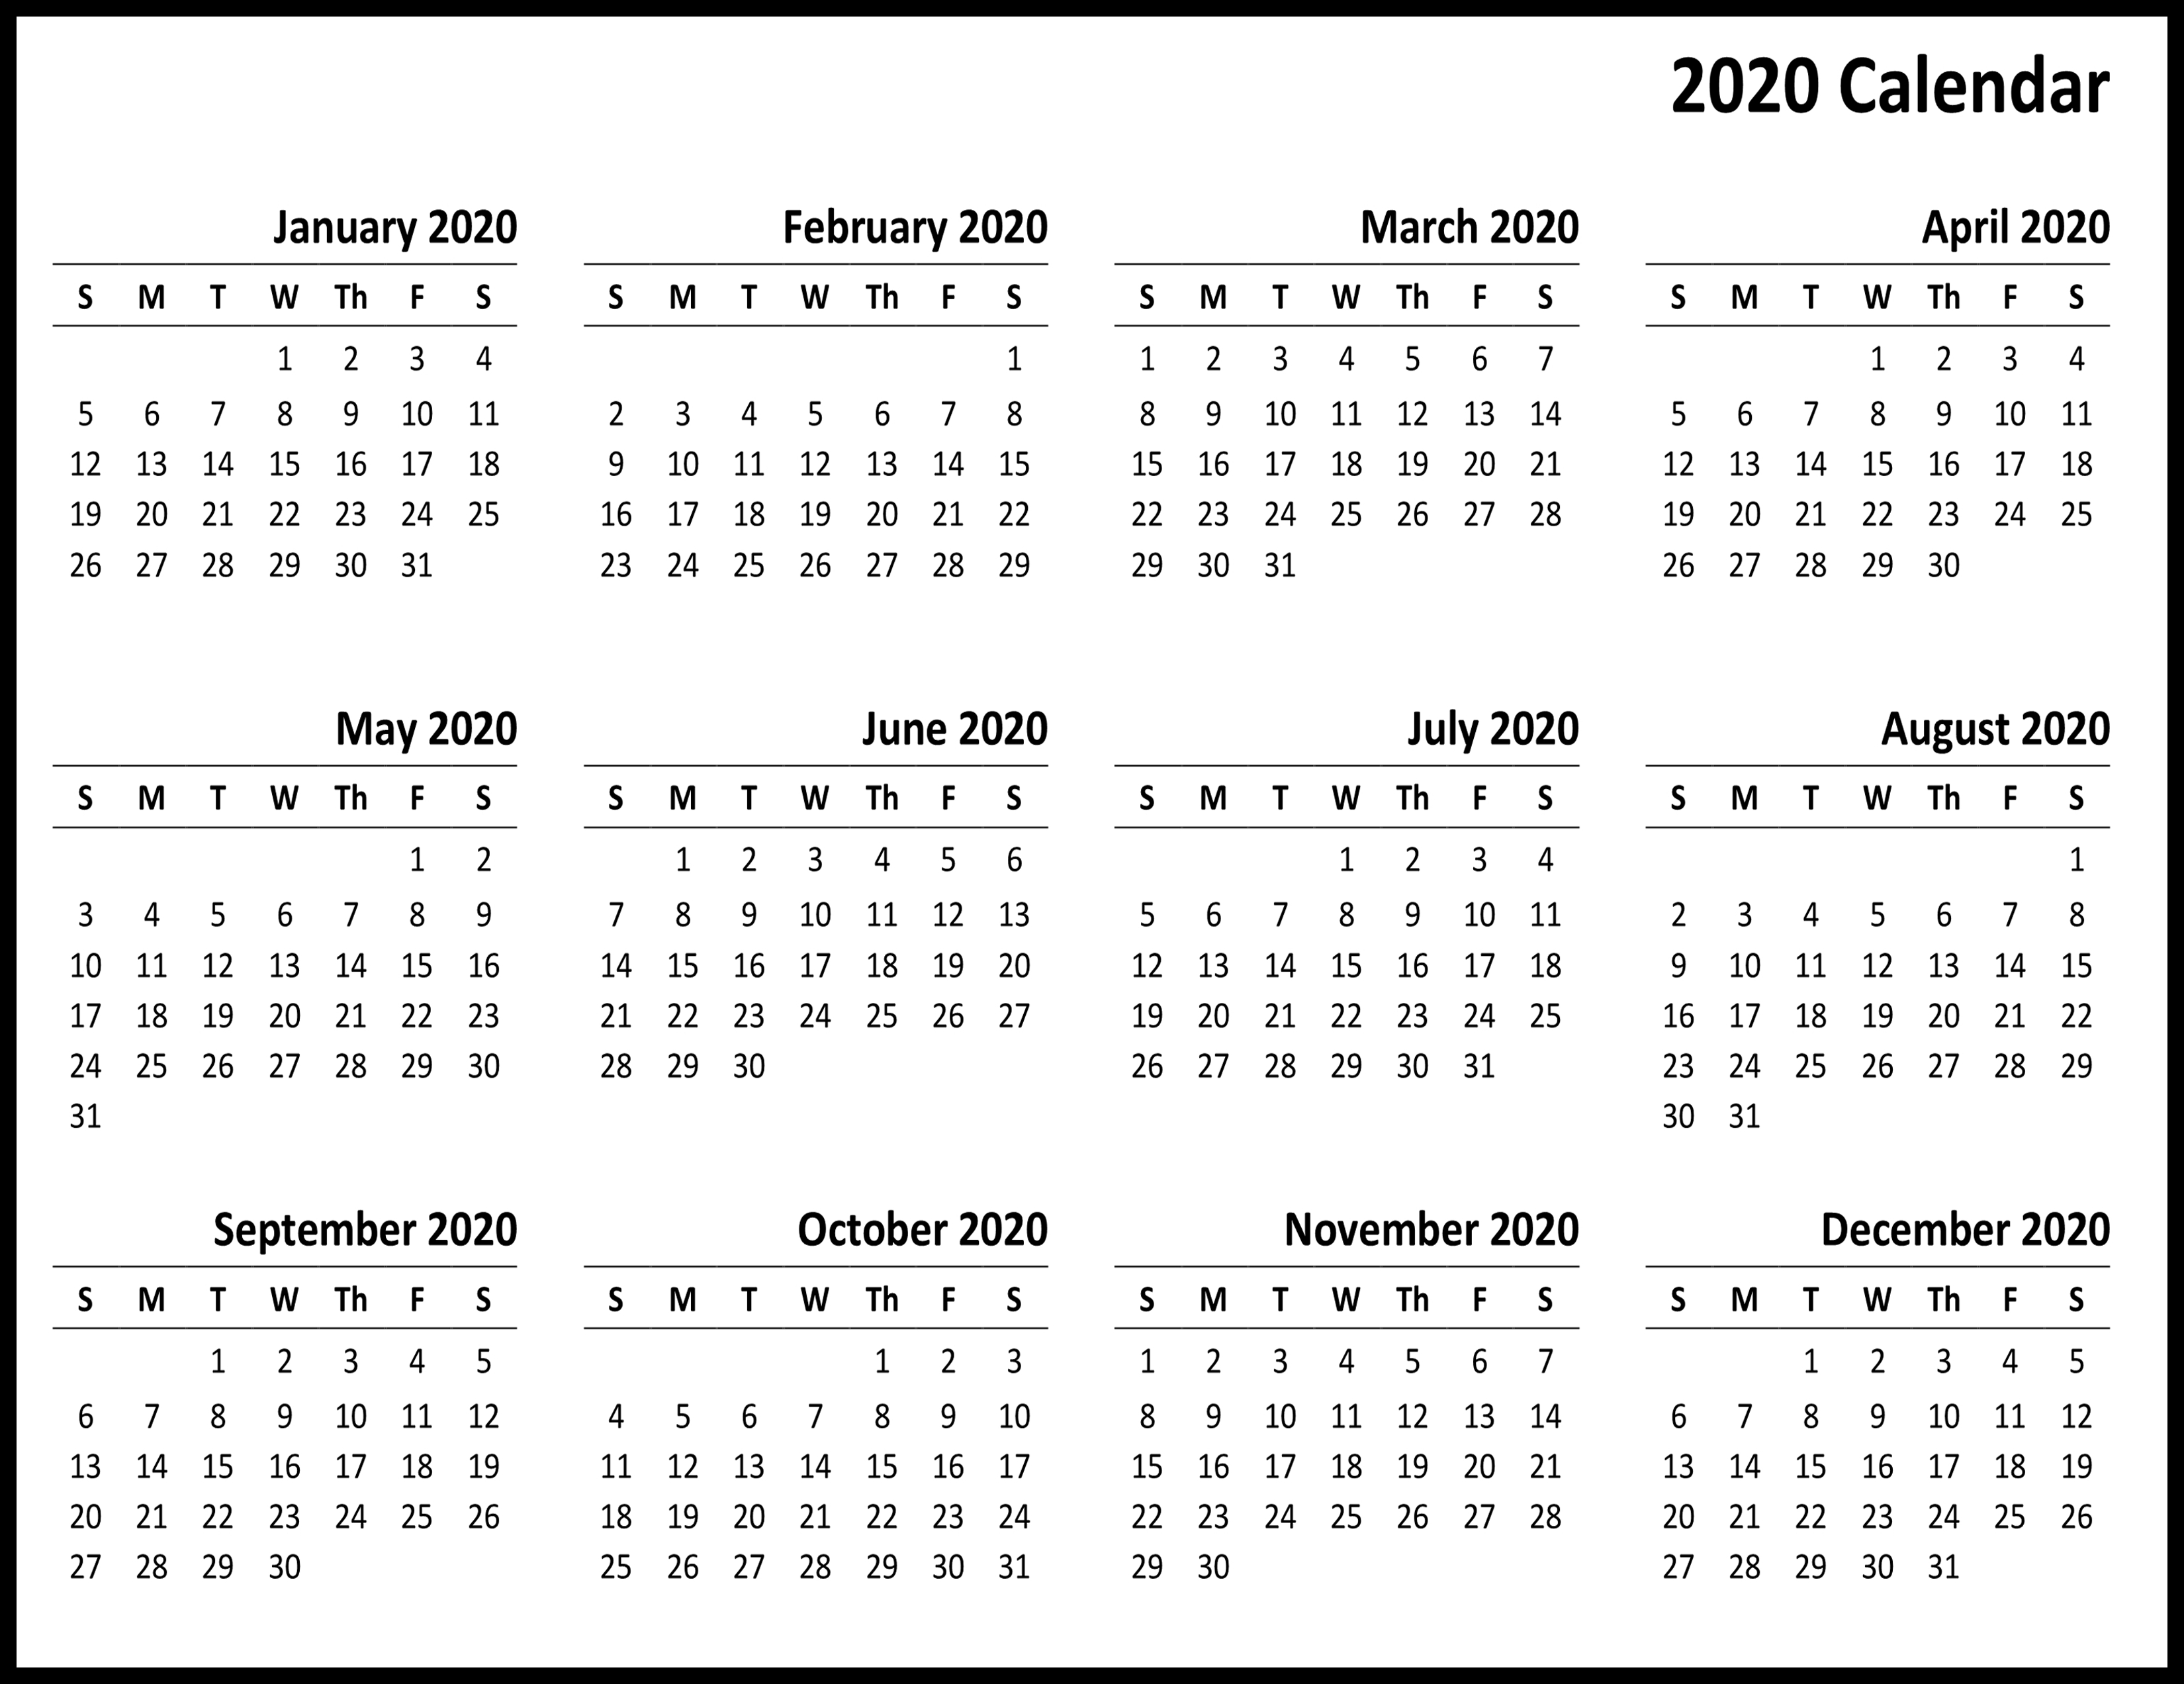 Free 2020 Yearly Printable Calendar Template | Calendar Wine inside 2020 Calendar Printable